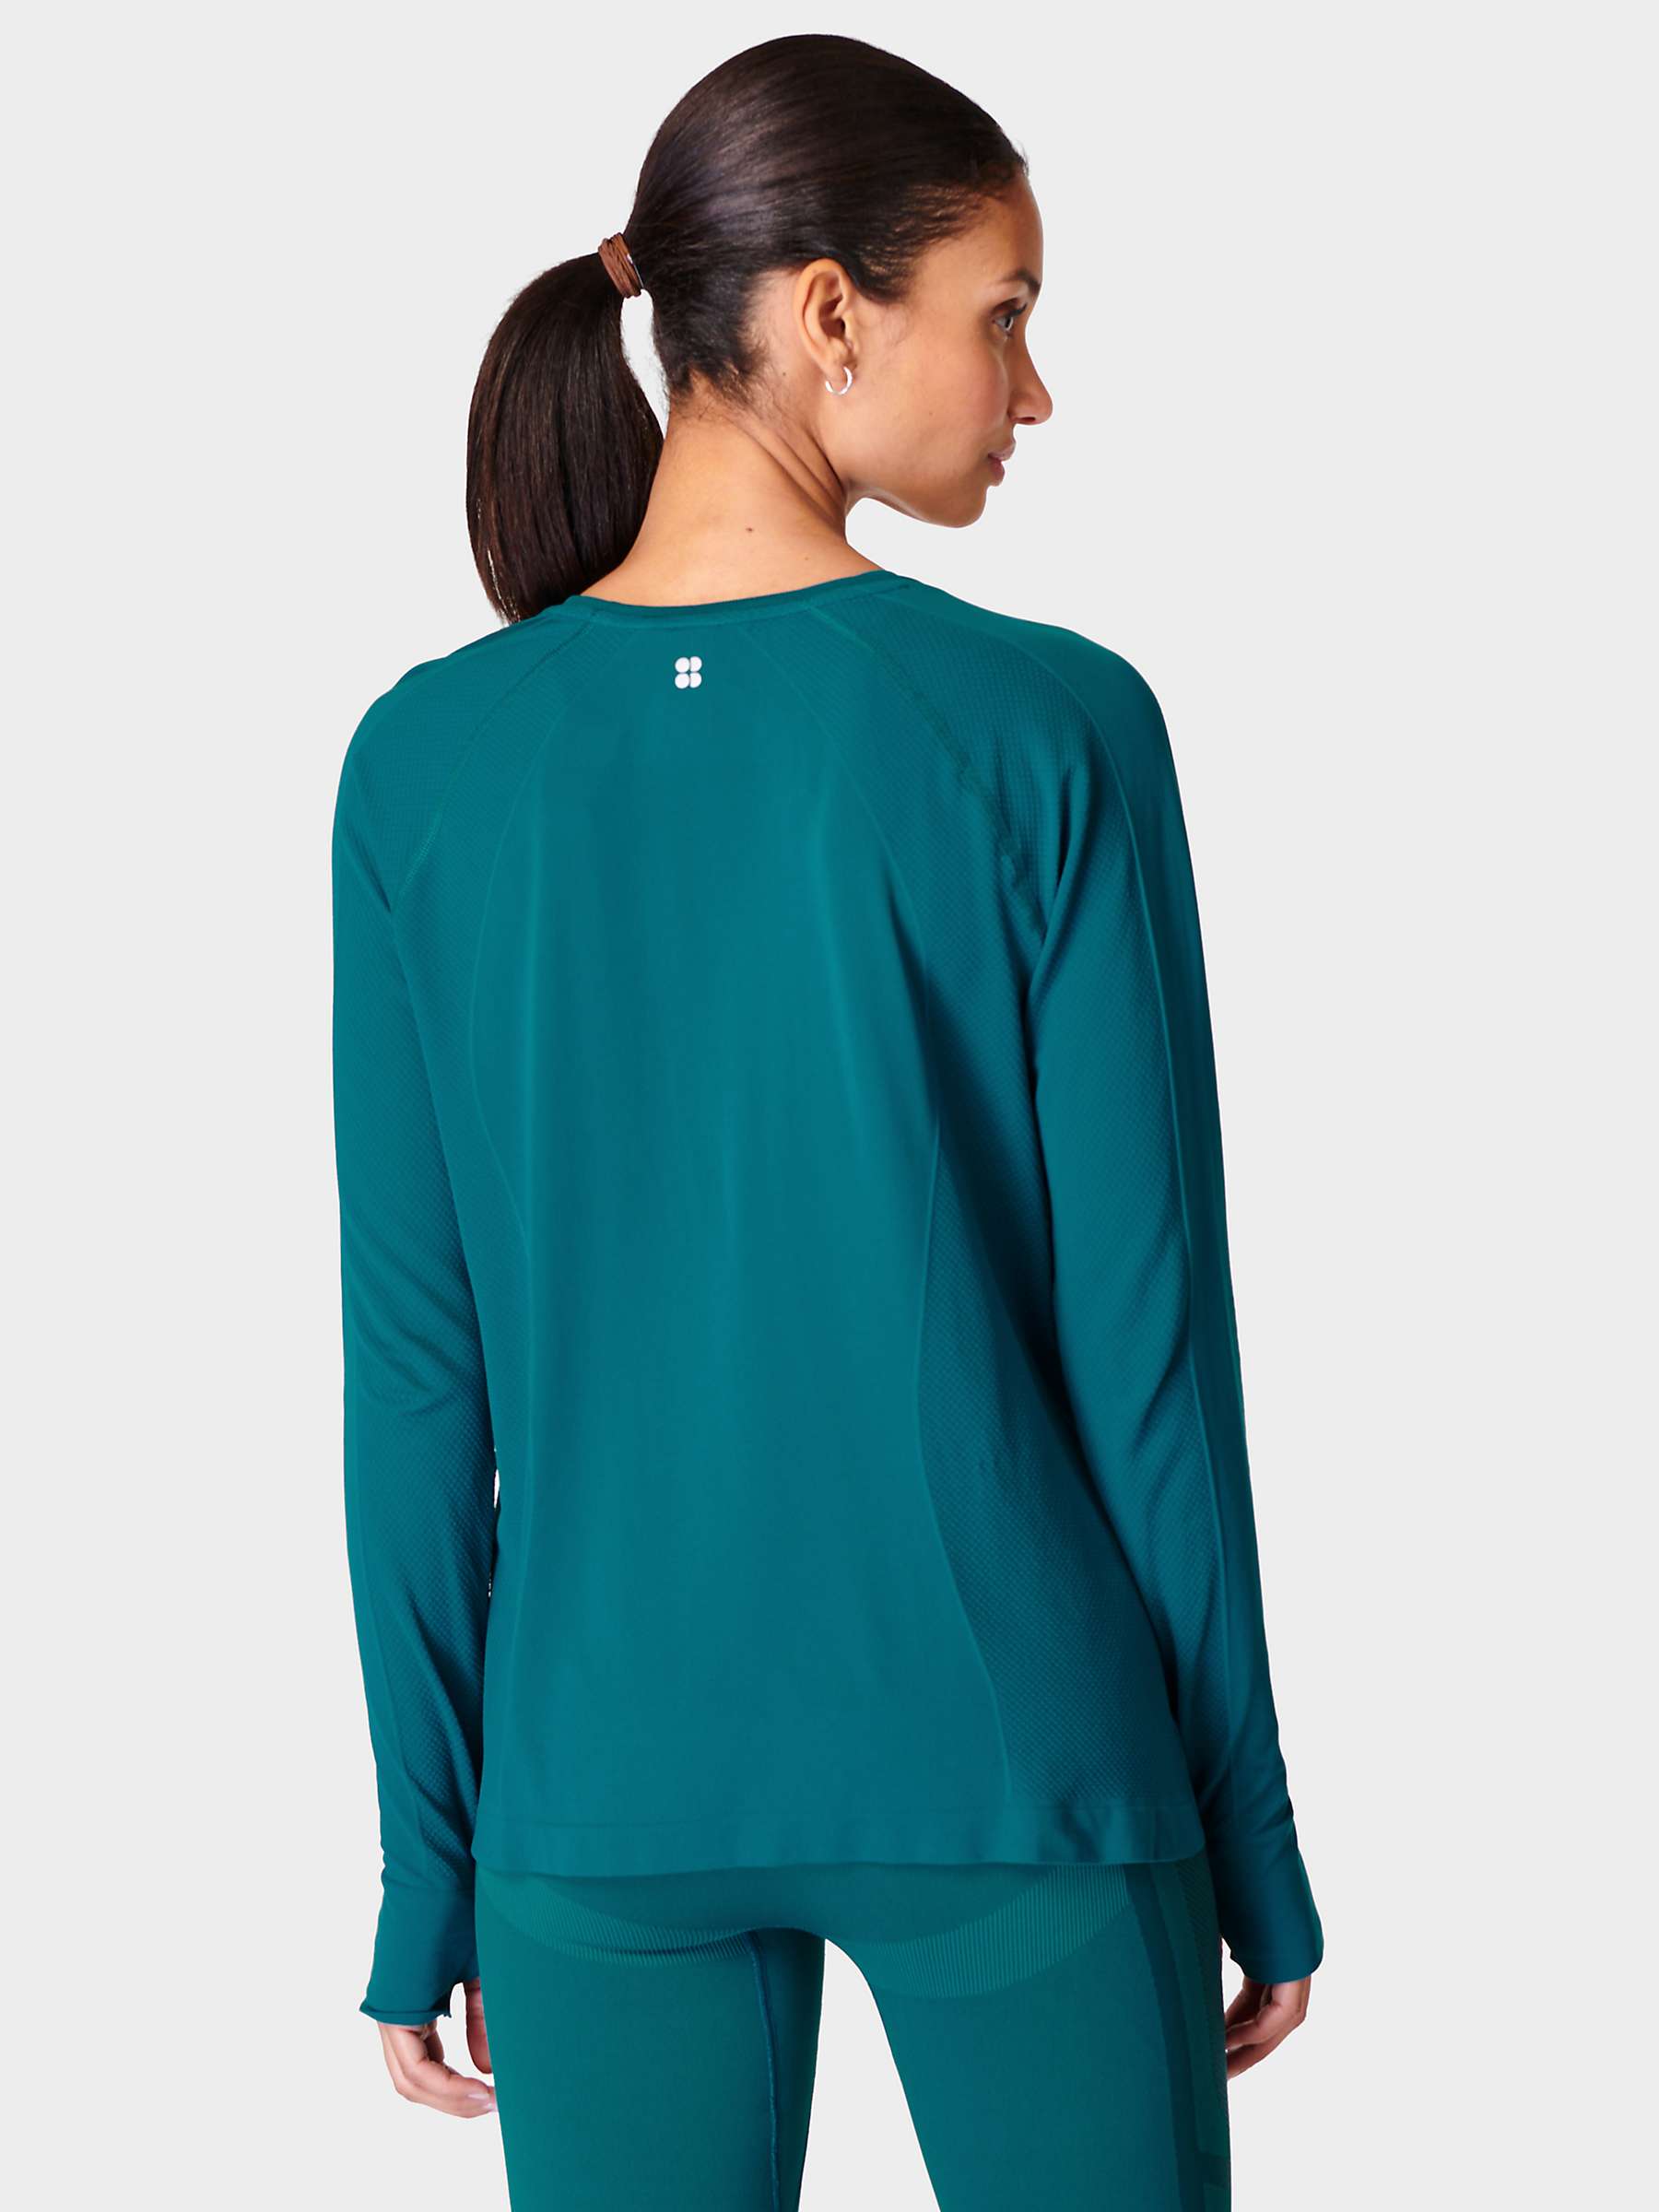 Buy Sweaty Betty Athlete Seamless Featherweight Long Sleeve Top Online at johnlewis.com